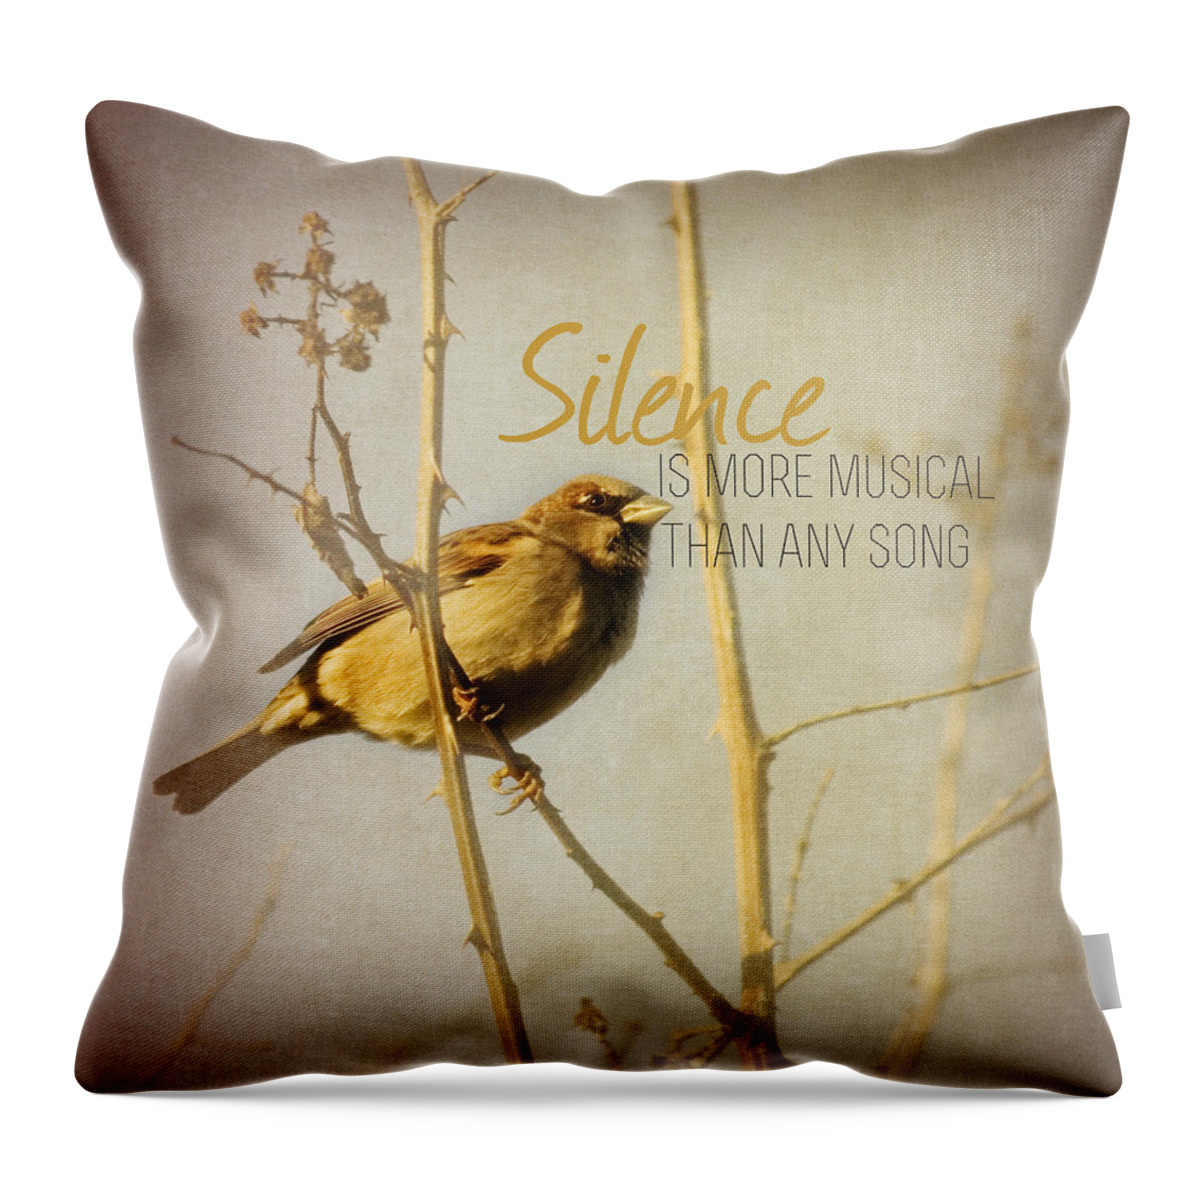 Wildlife Photography Throw Pillow featuring the photograph Silence #2 by Bonnie Bruno